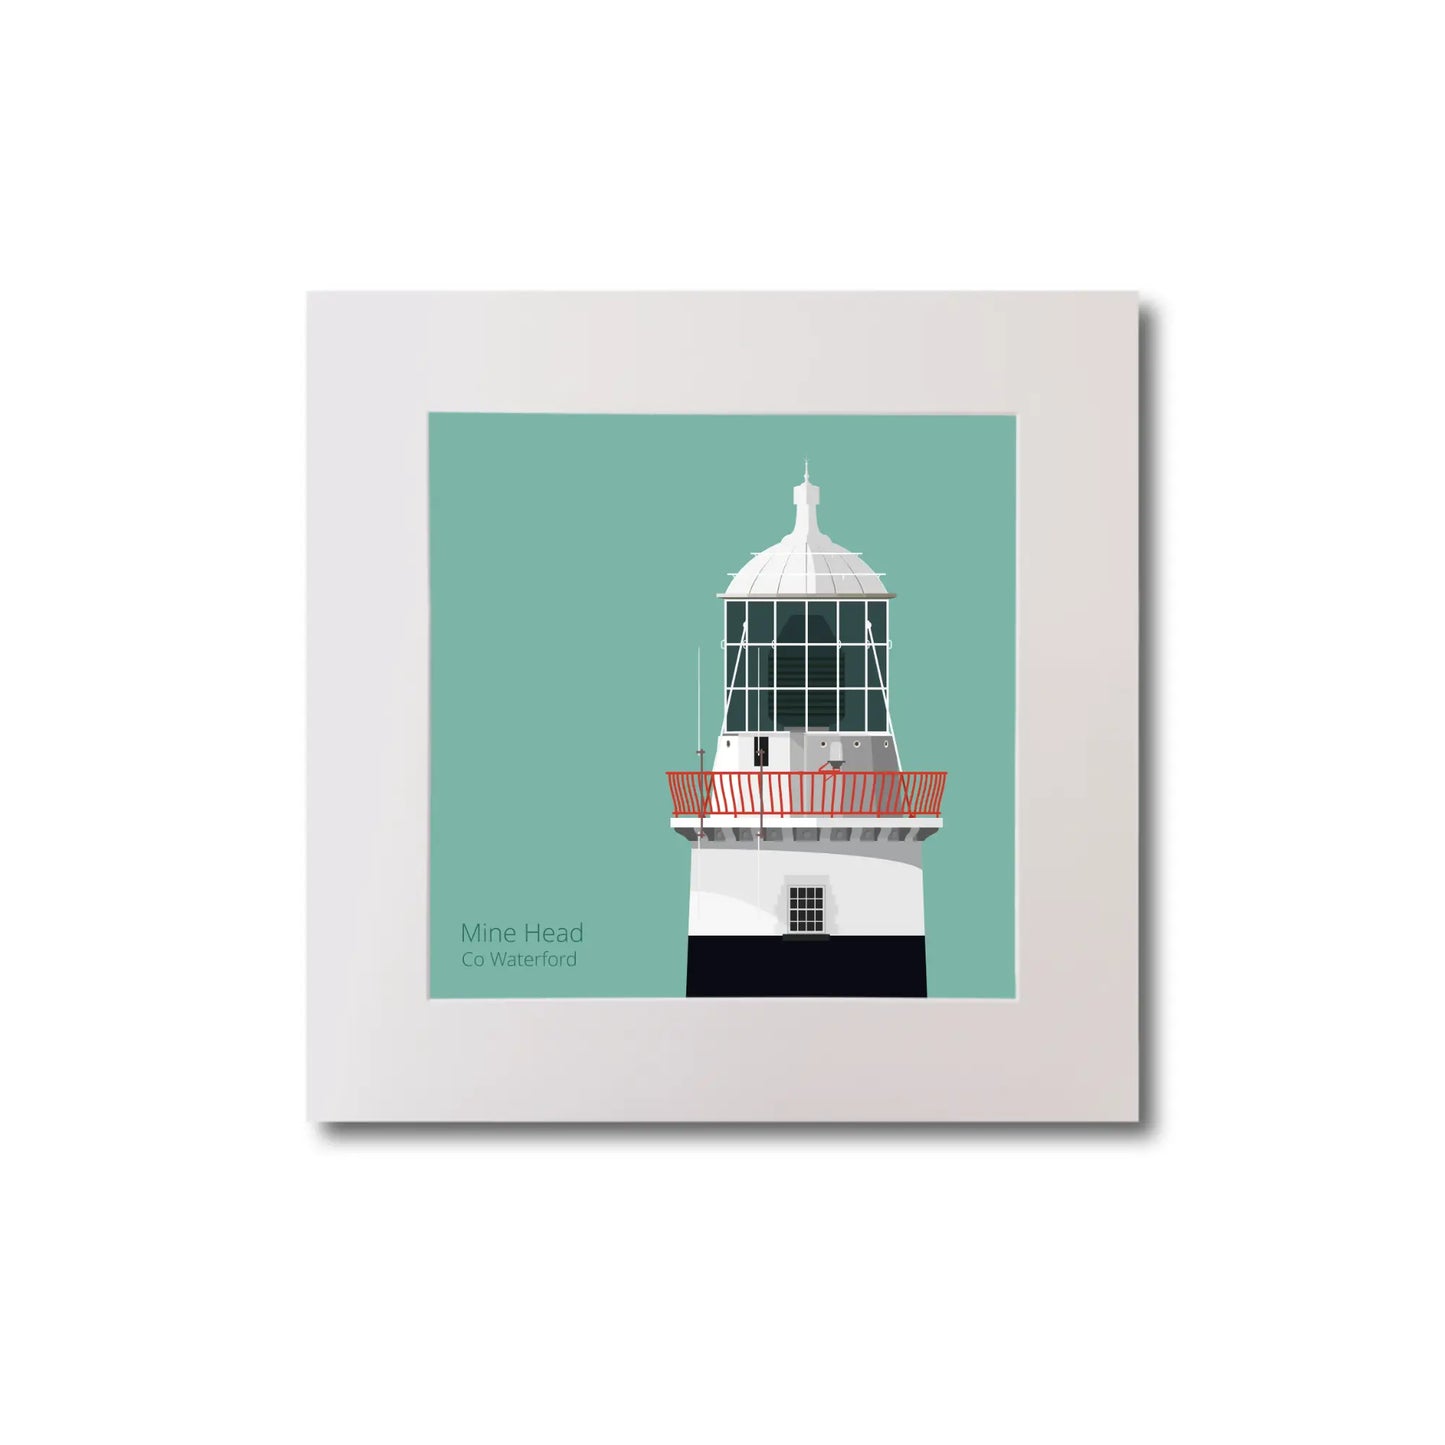 Illustration of Mine Head lighthouse on an ocean green background, mounted and measuring 20x20cm.